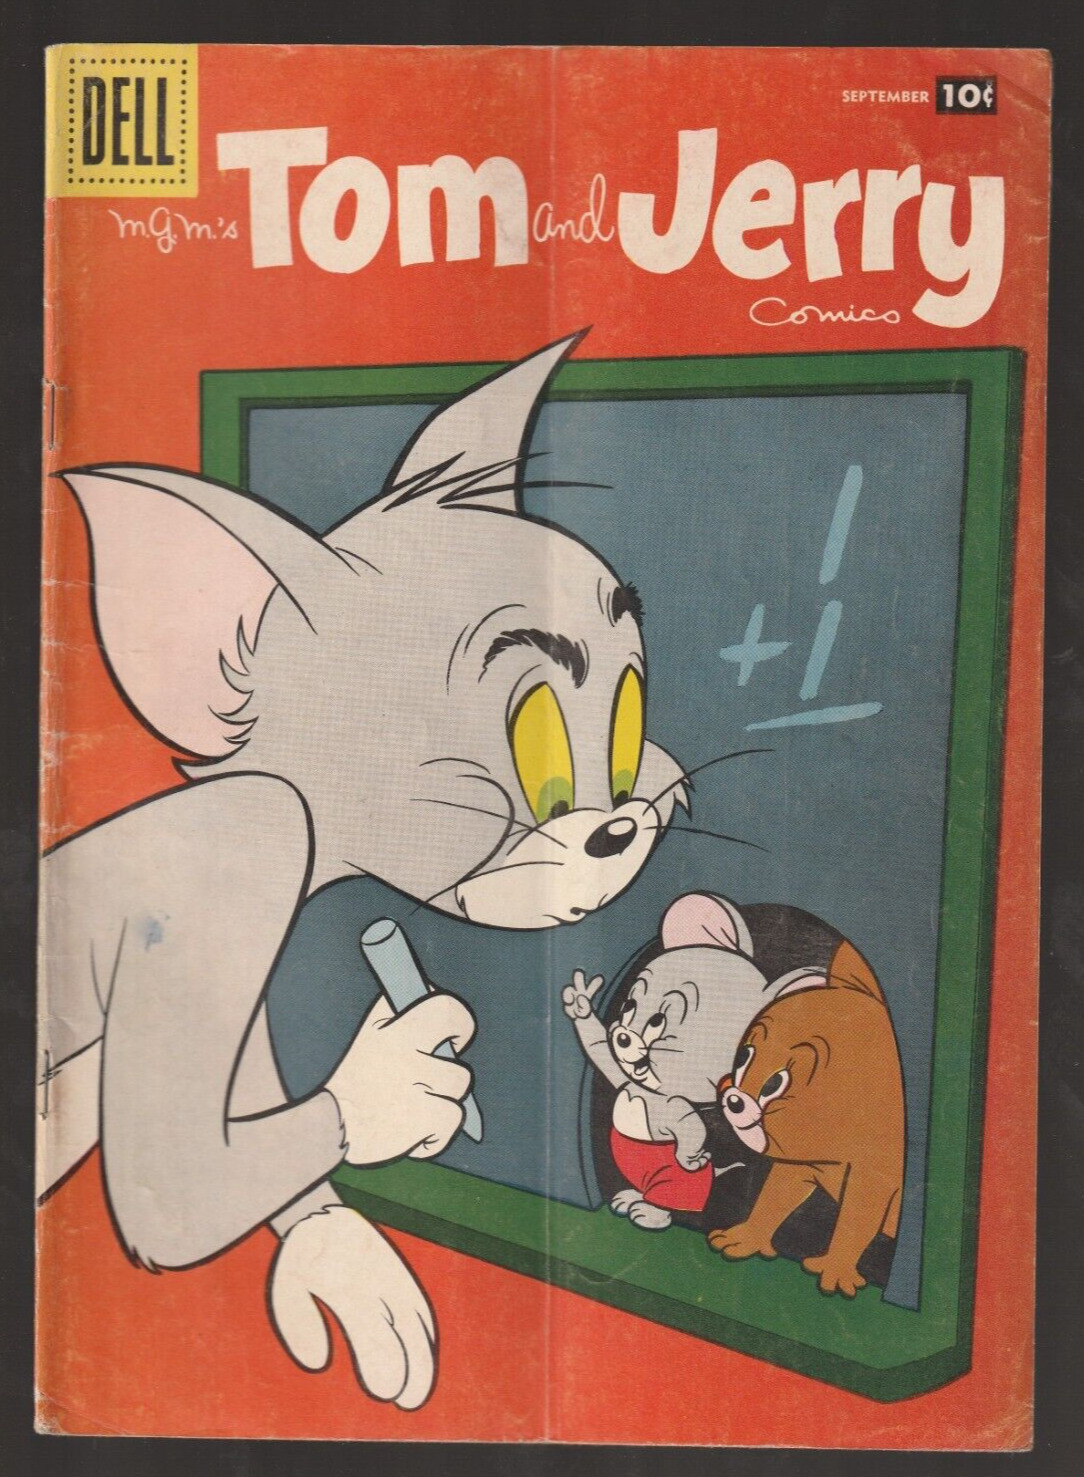 Dell MGM's Tom and Jerry Comics #158 September 1957 Readable Good